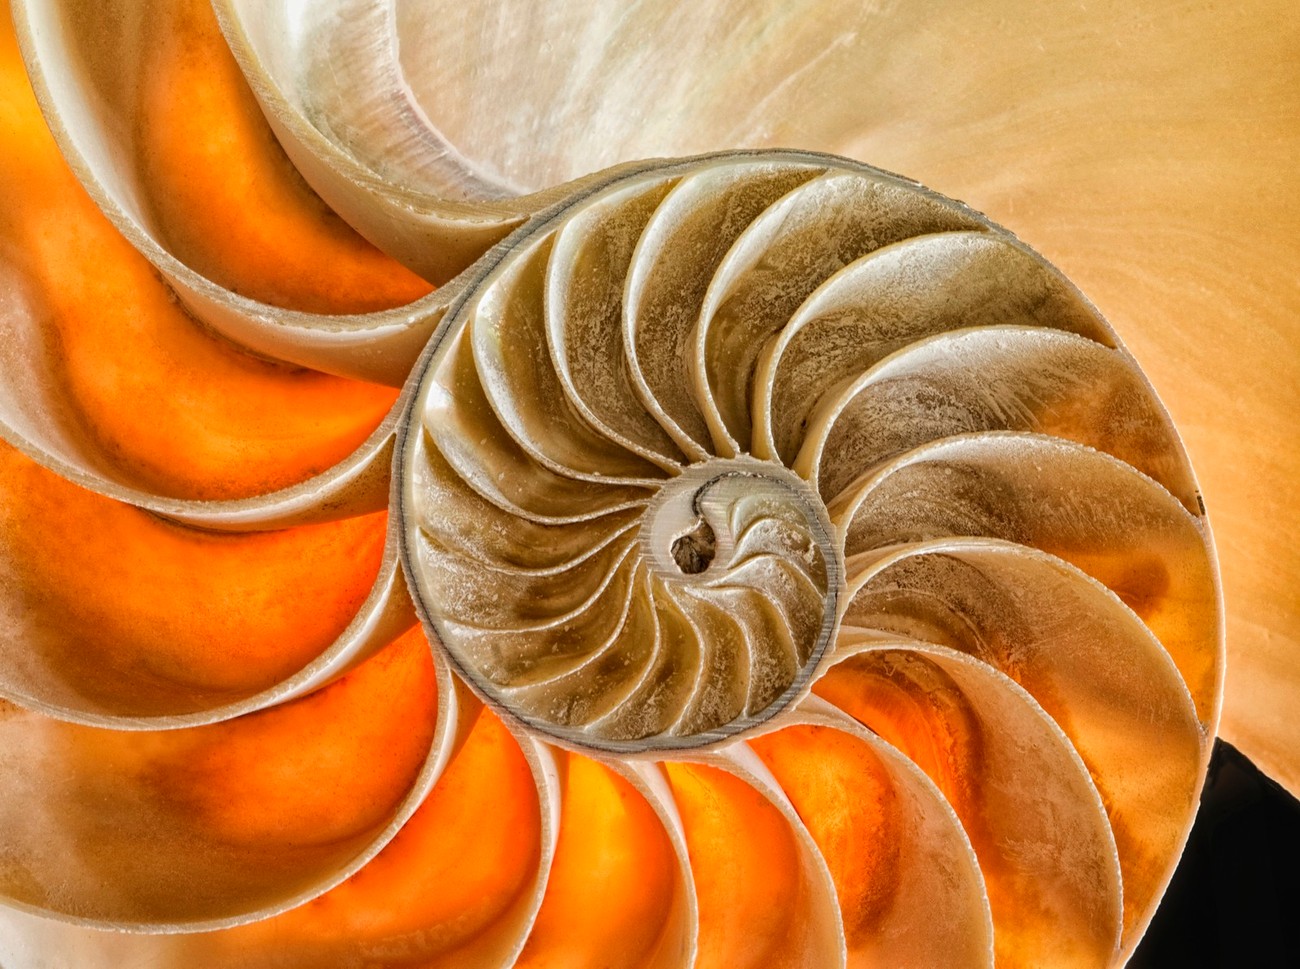 30+ Must See Photos Of Patterns In Nature - Congratulations To All The Photo Contest Finalists!